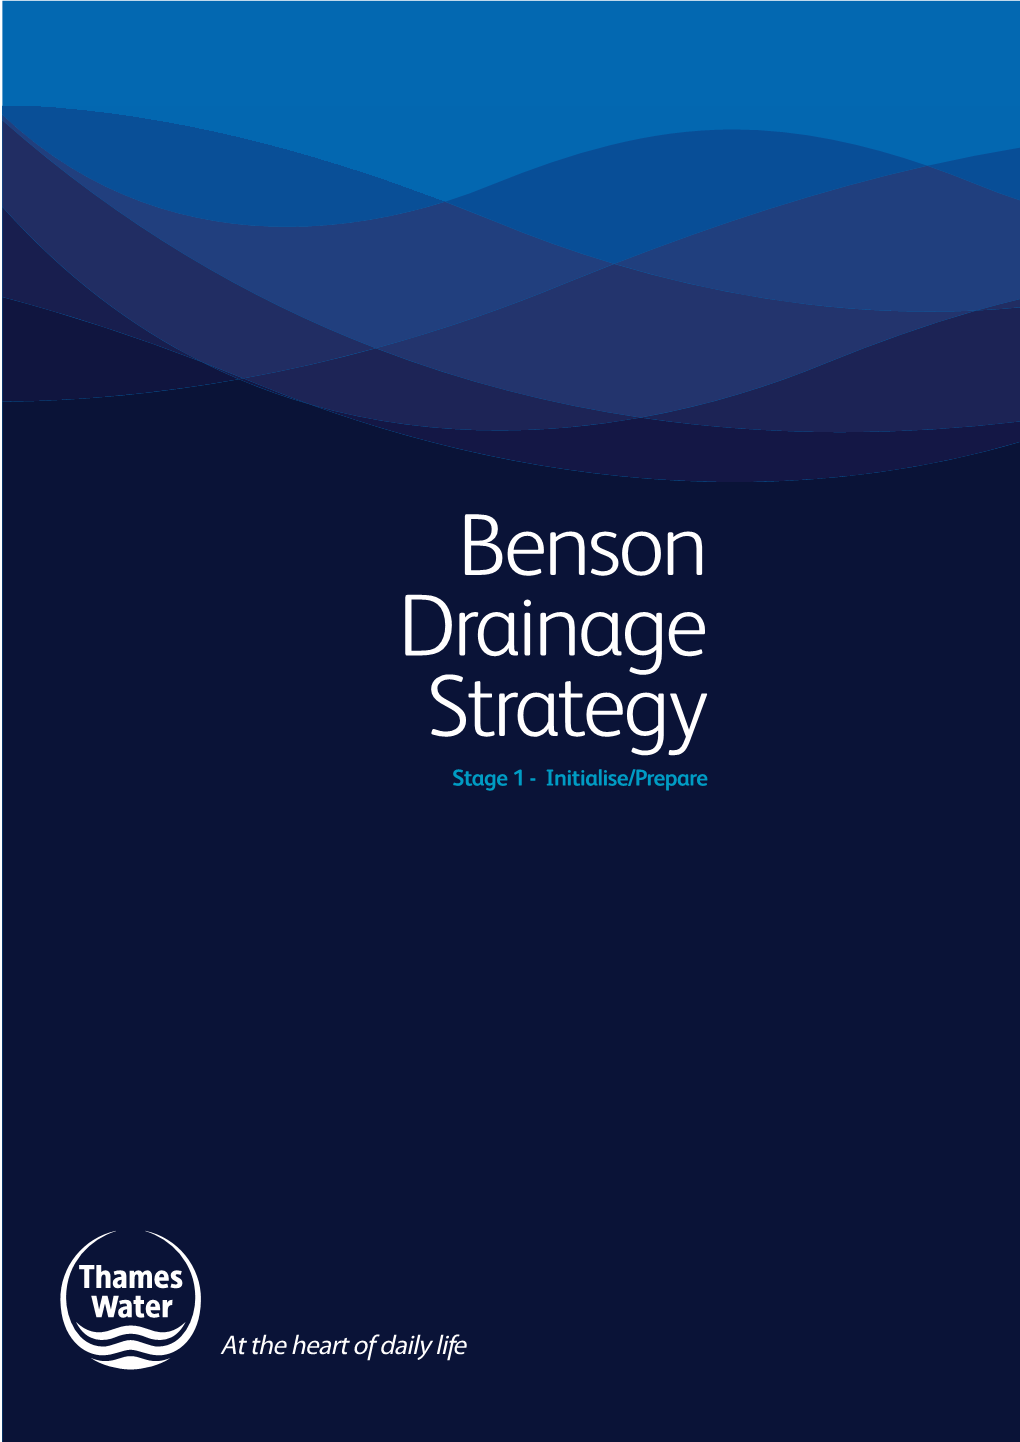 Benson Drainage Strategy Stage 1 - Initialise/Prepare Introduction